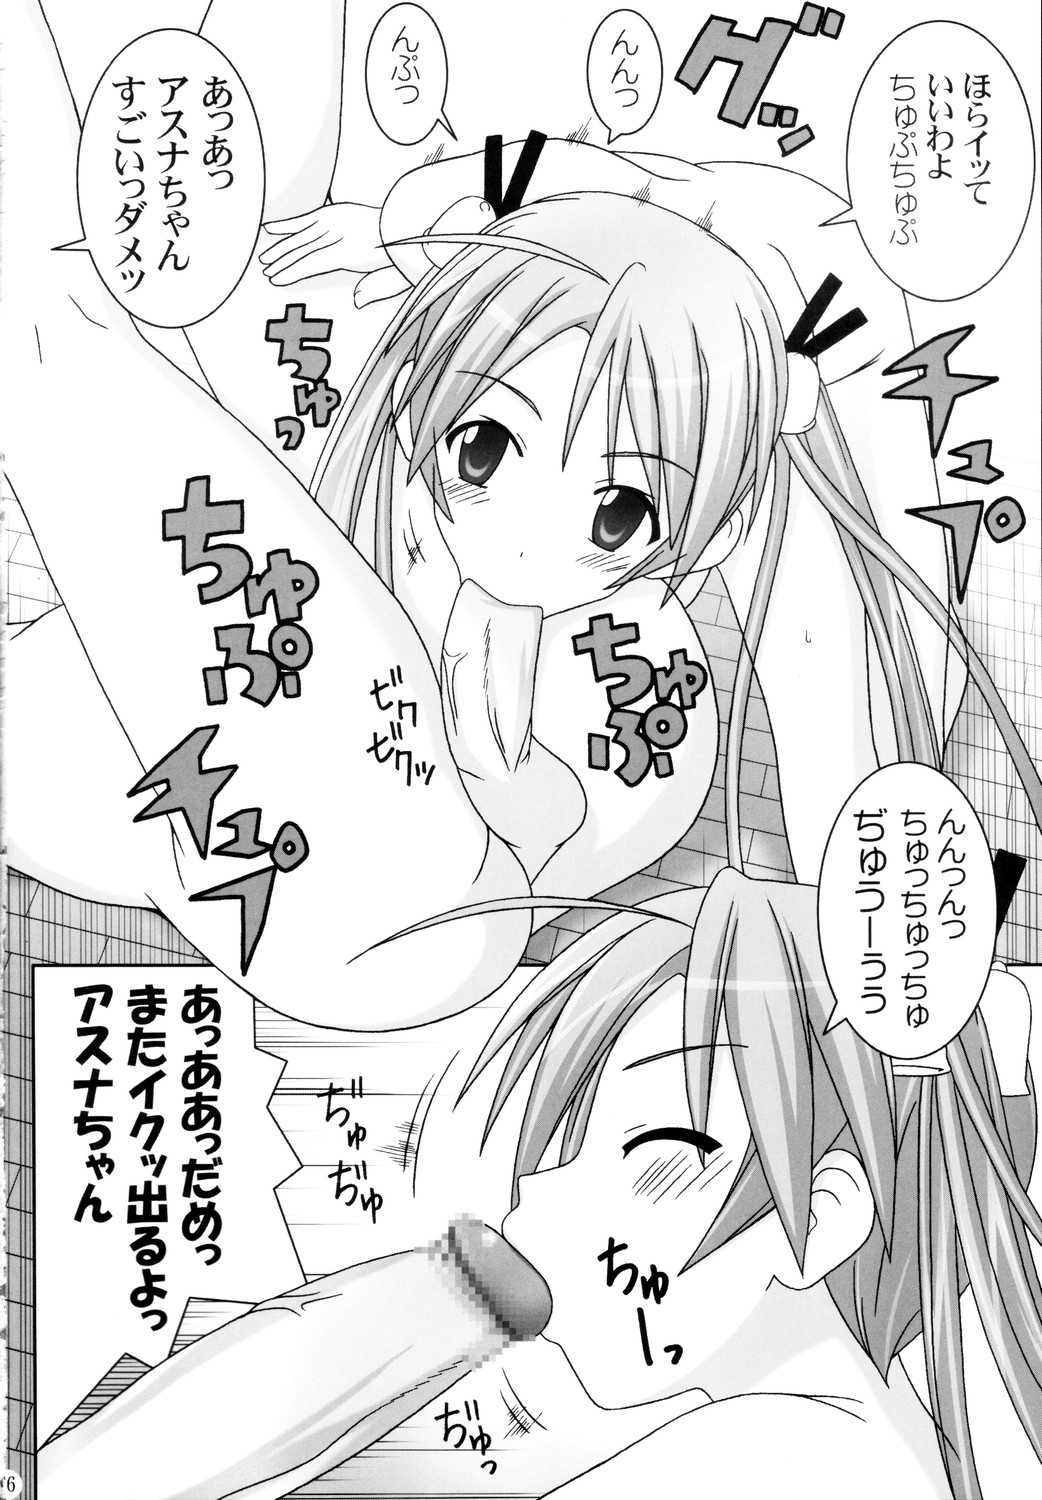 [Gust] Asuna Only (Negima) 